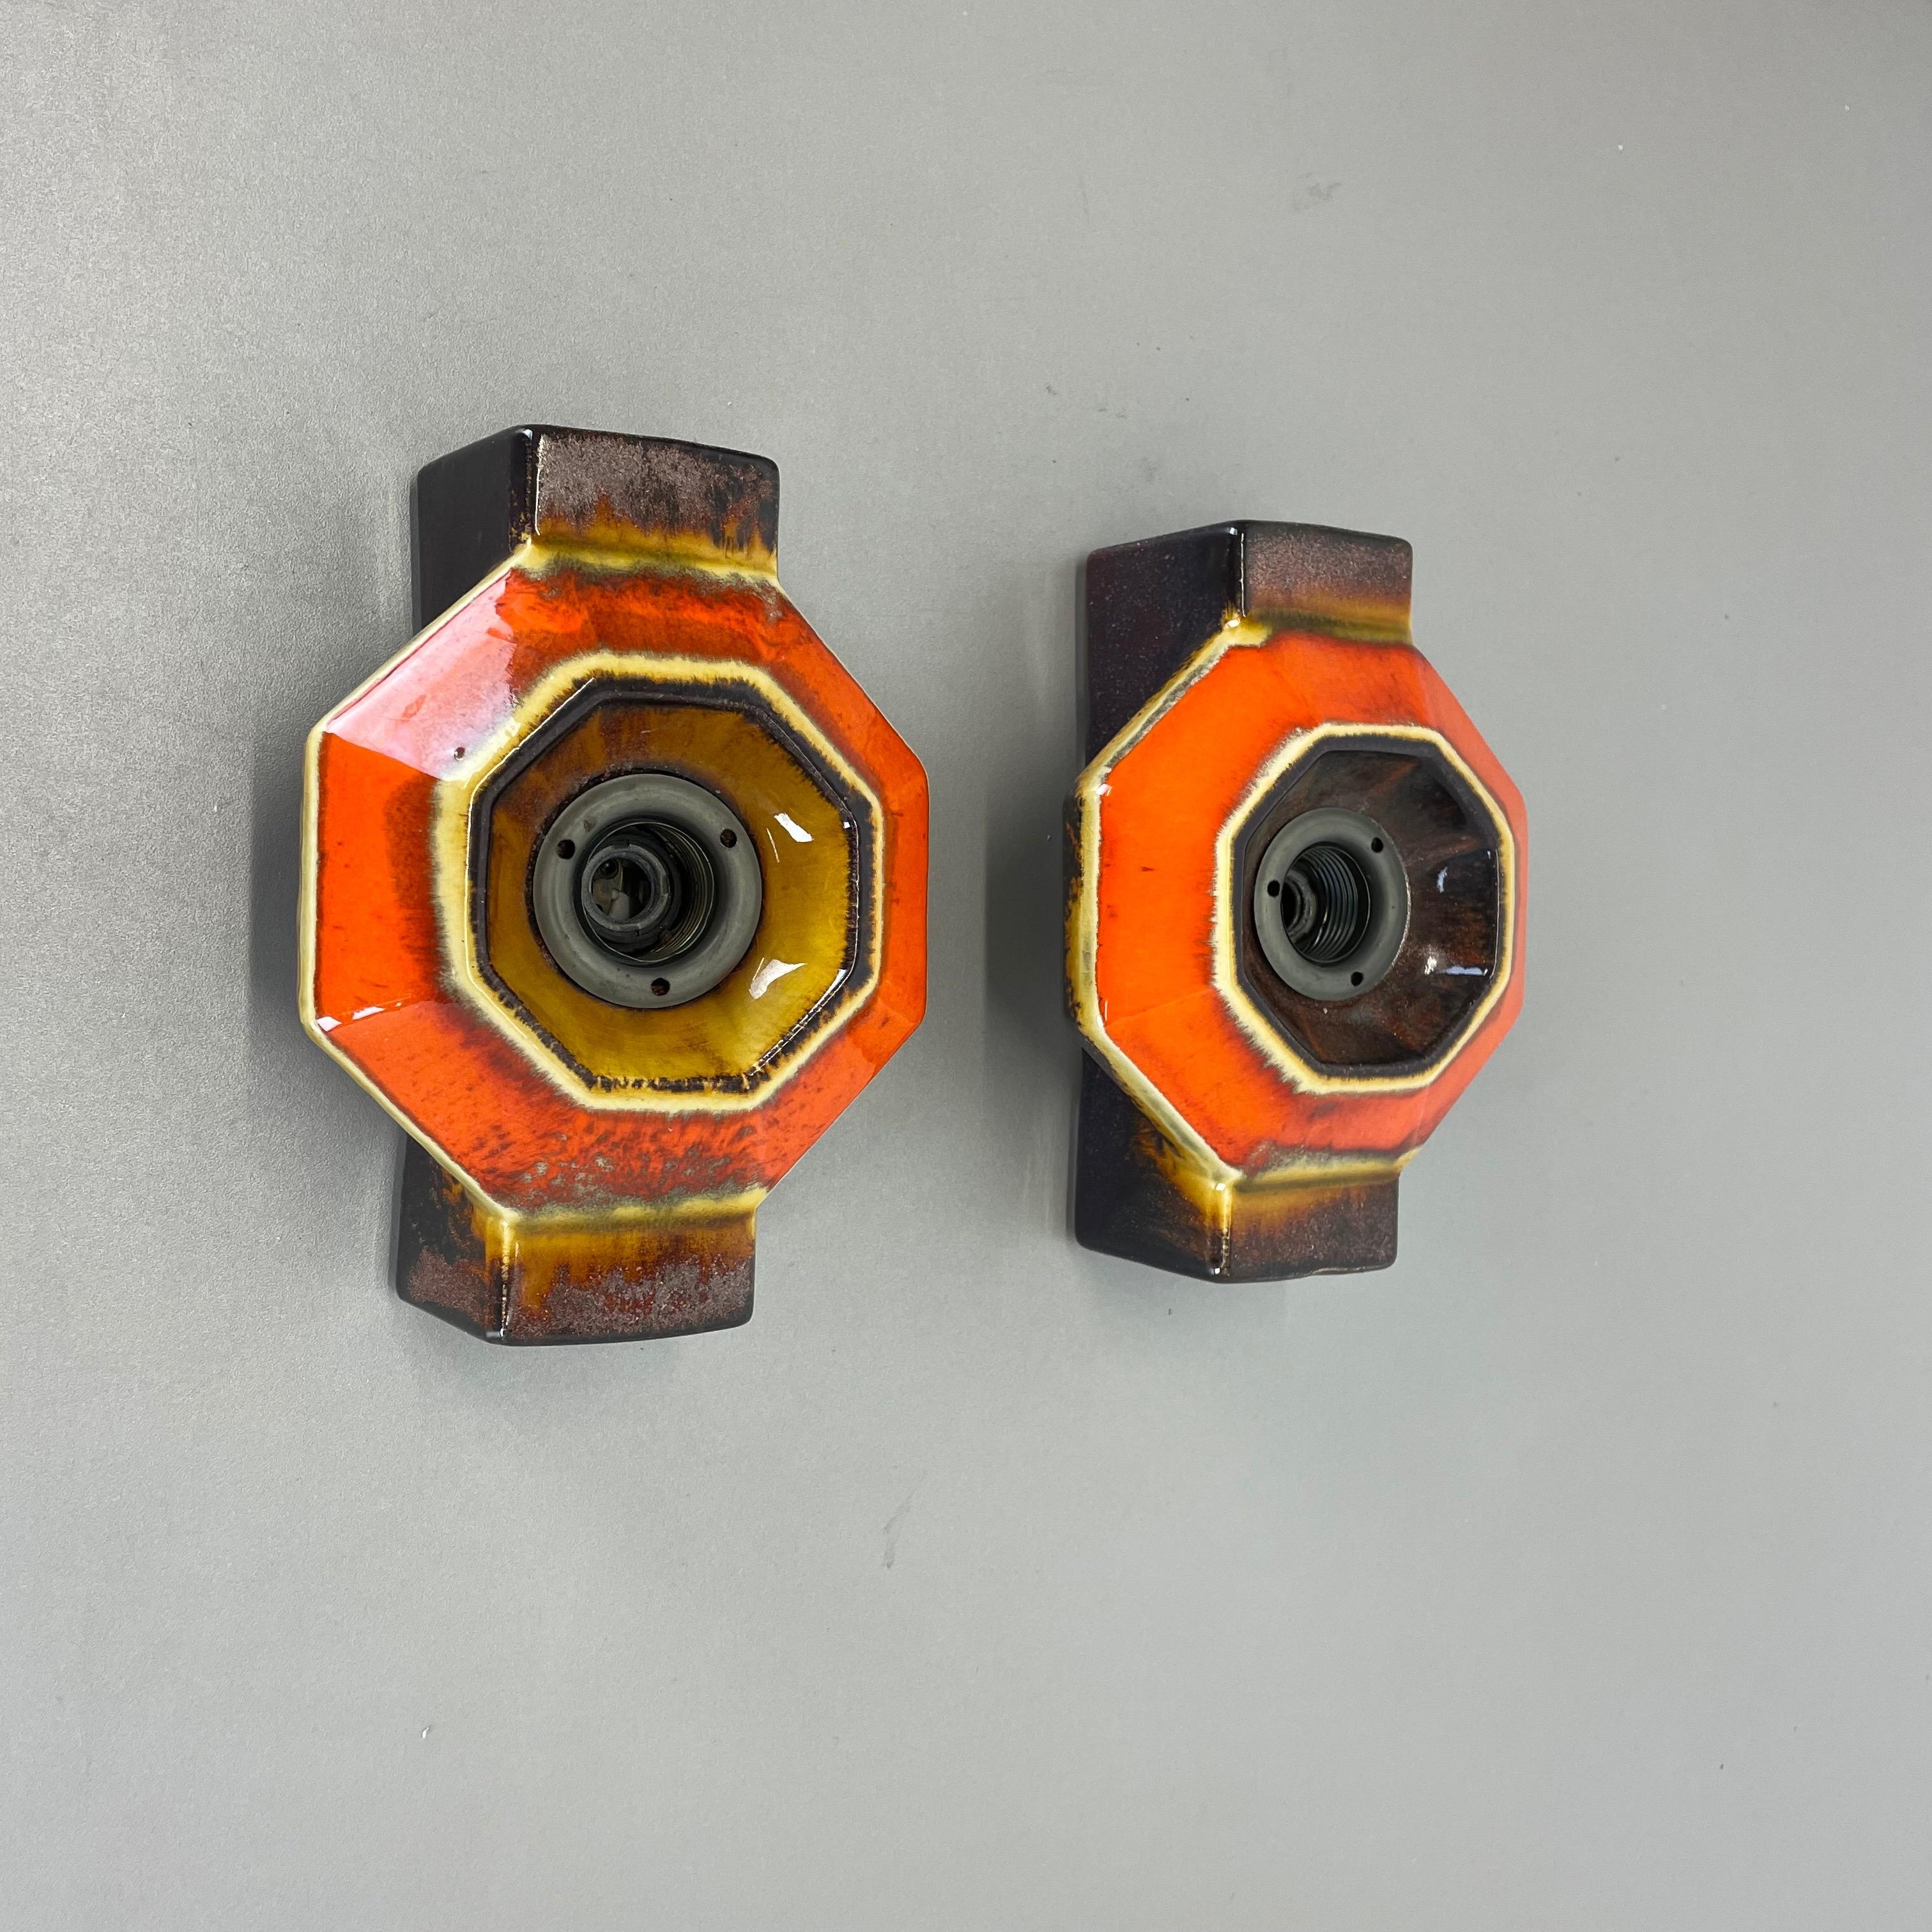 Article:

Wall light sconce set of two.


Producer:

Pan Ceramic, Germany.



Origin:

Germany.



Age:

1970s.



Description:

Original 1970s modernist German wall light made of ceramic in fat lava optic. This super rare